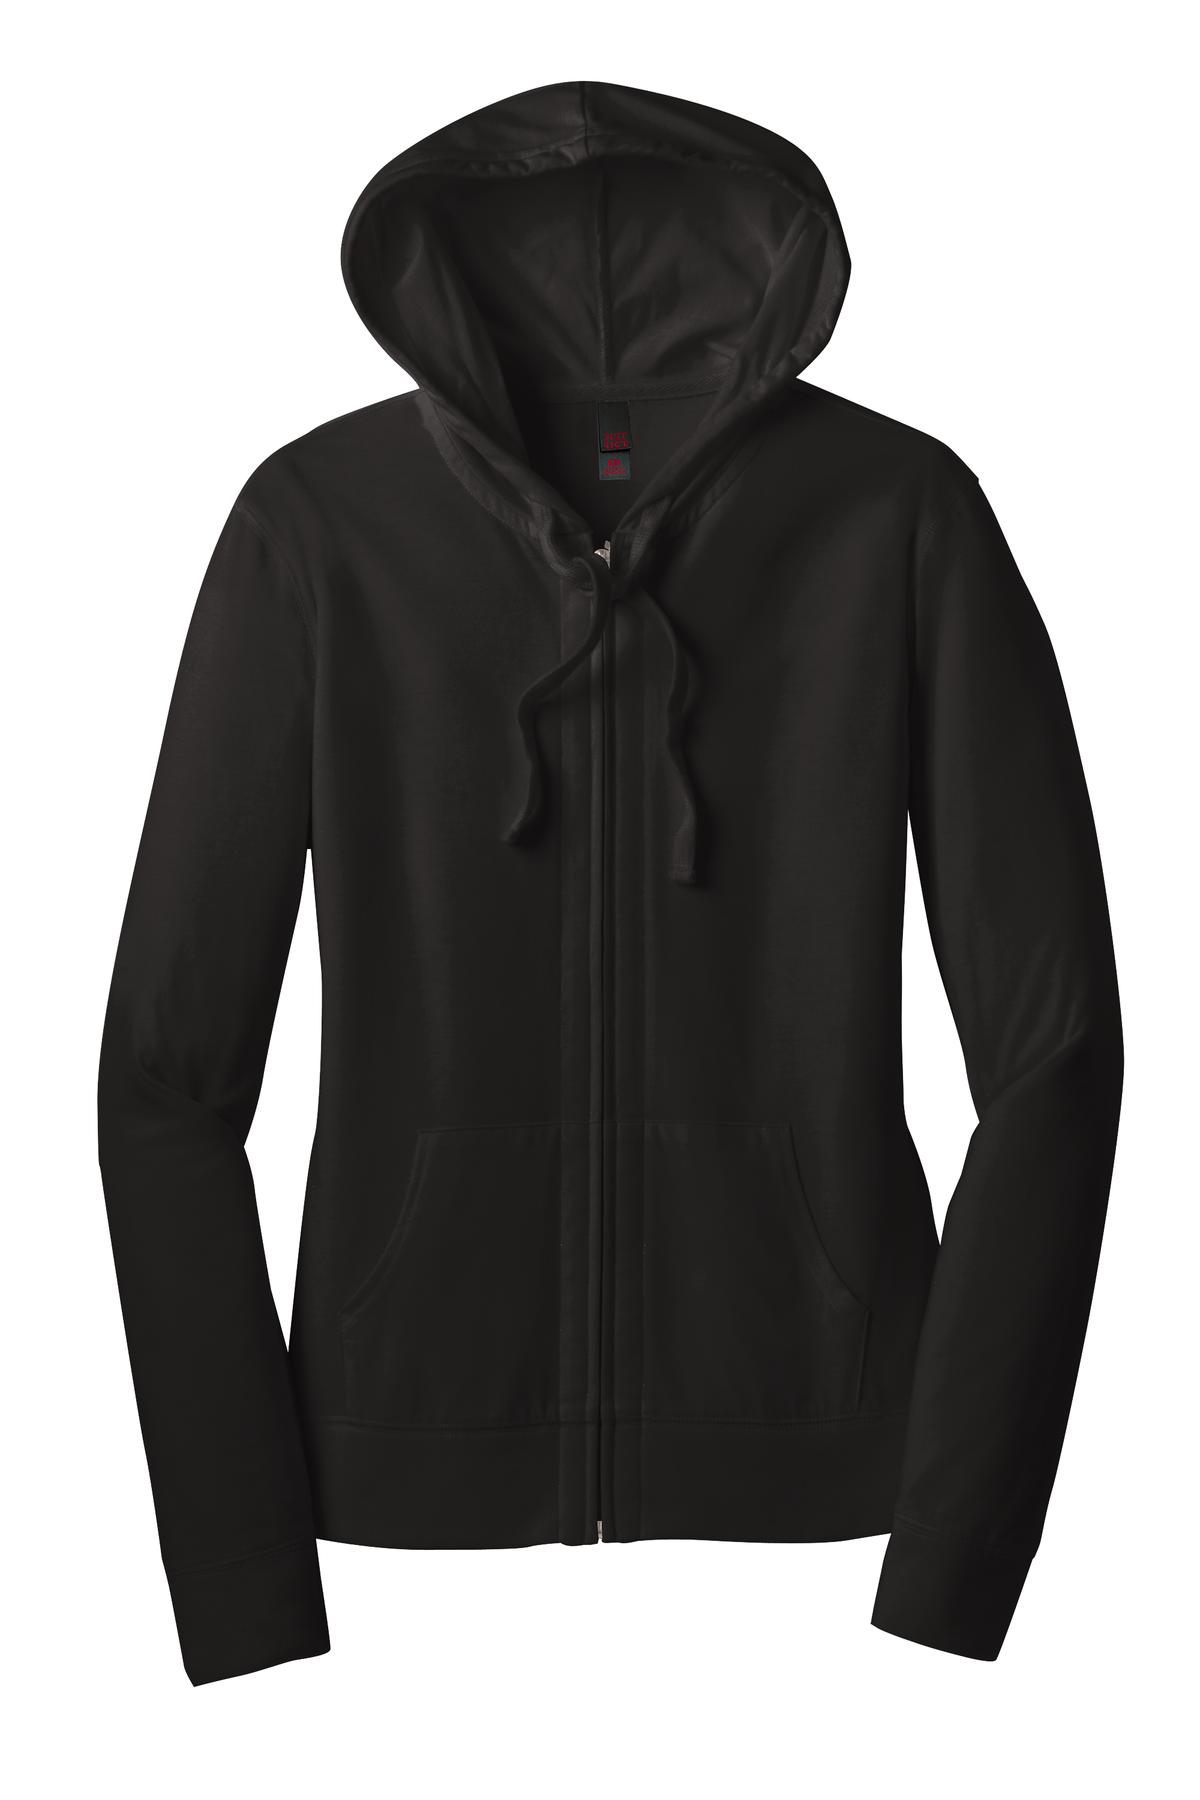 District ® Women's Fitted Jersey Full-Zip Hoodie. DT2100 - Custom Shirt ...